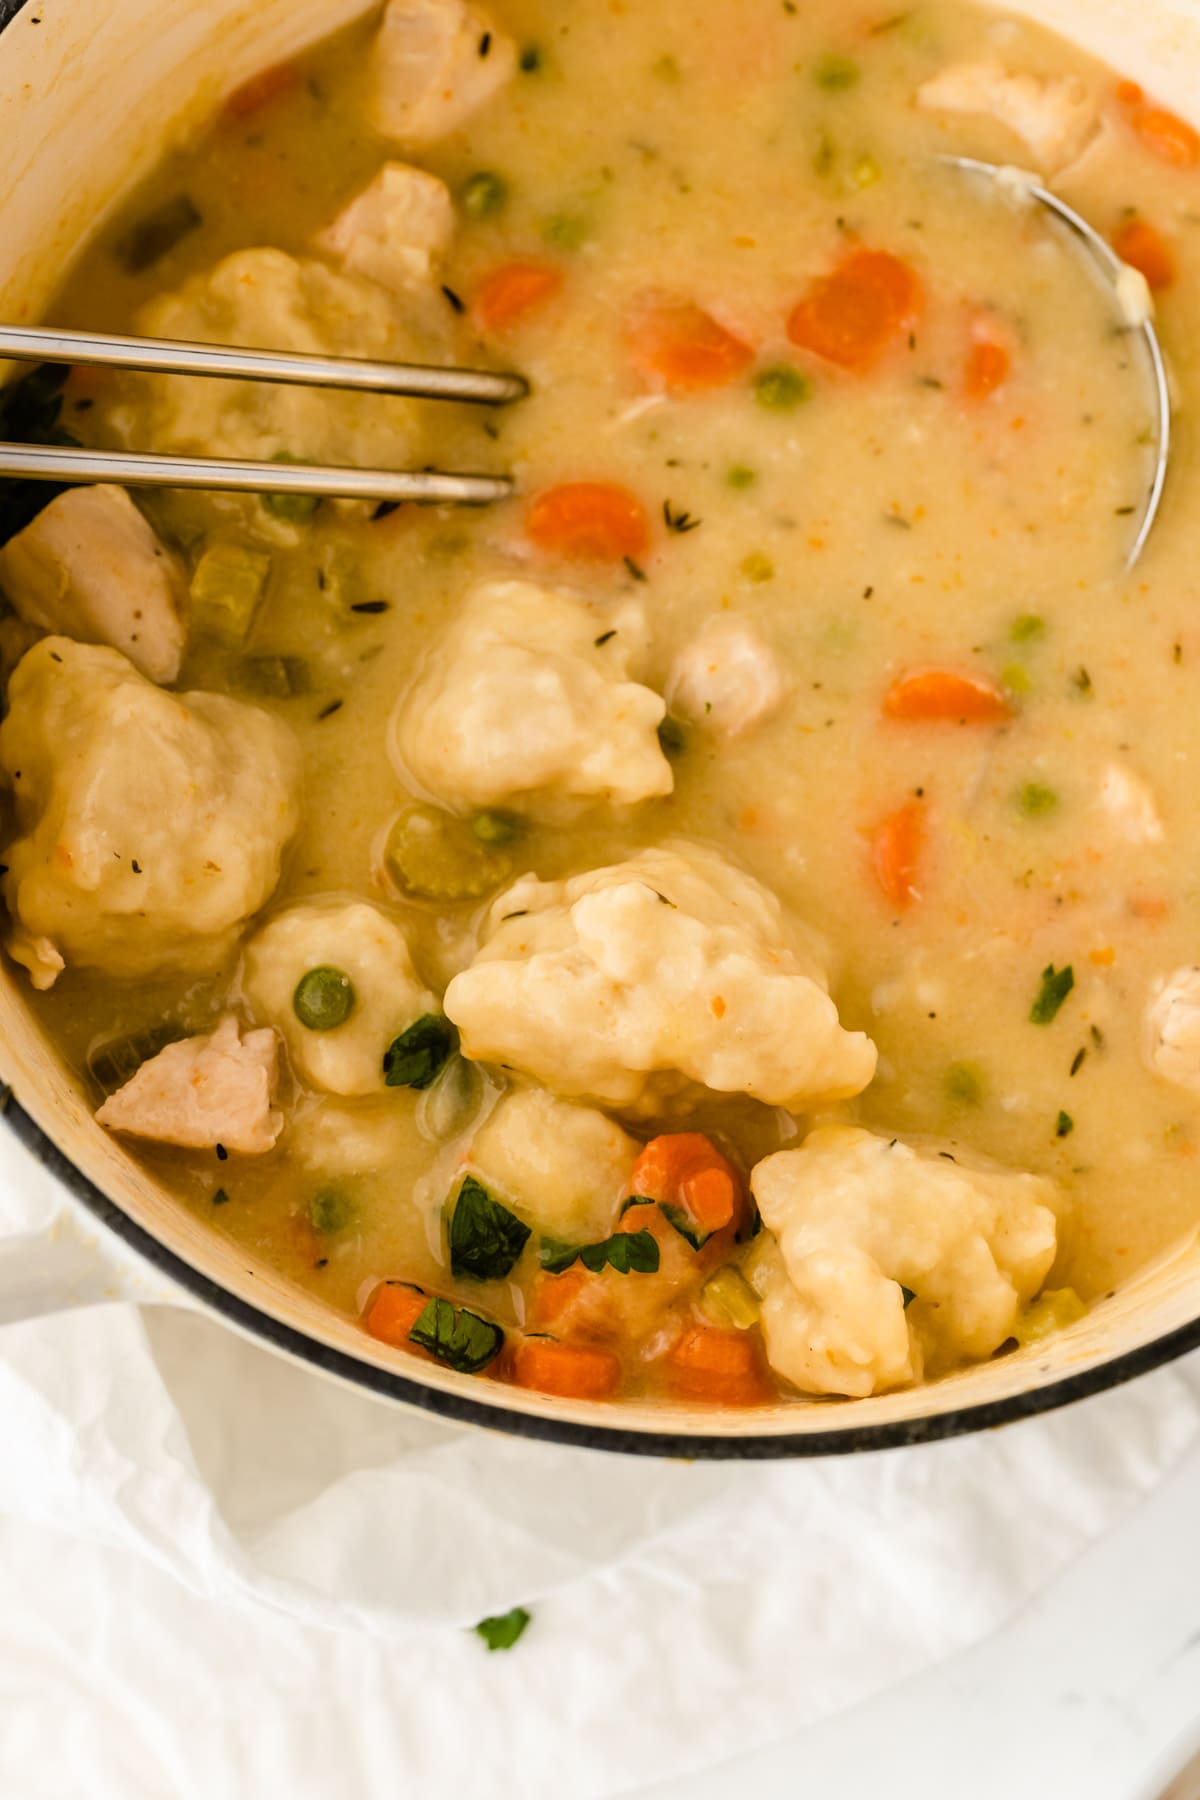 Chicken and dumpling soup up close in pot